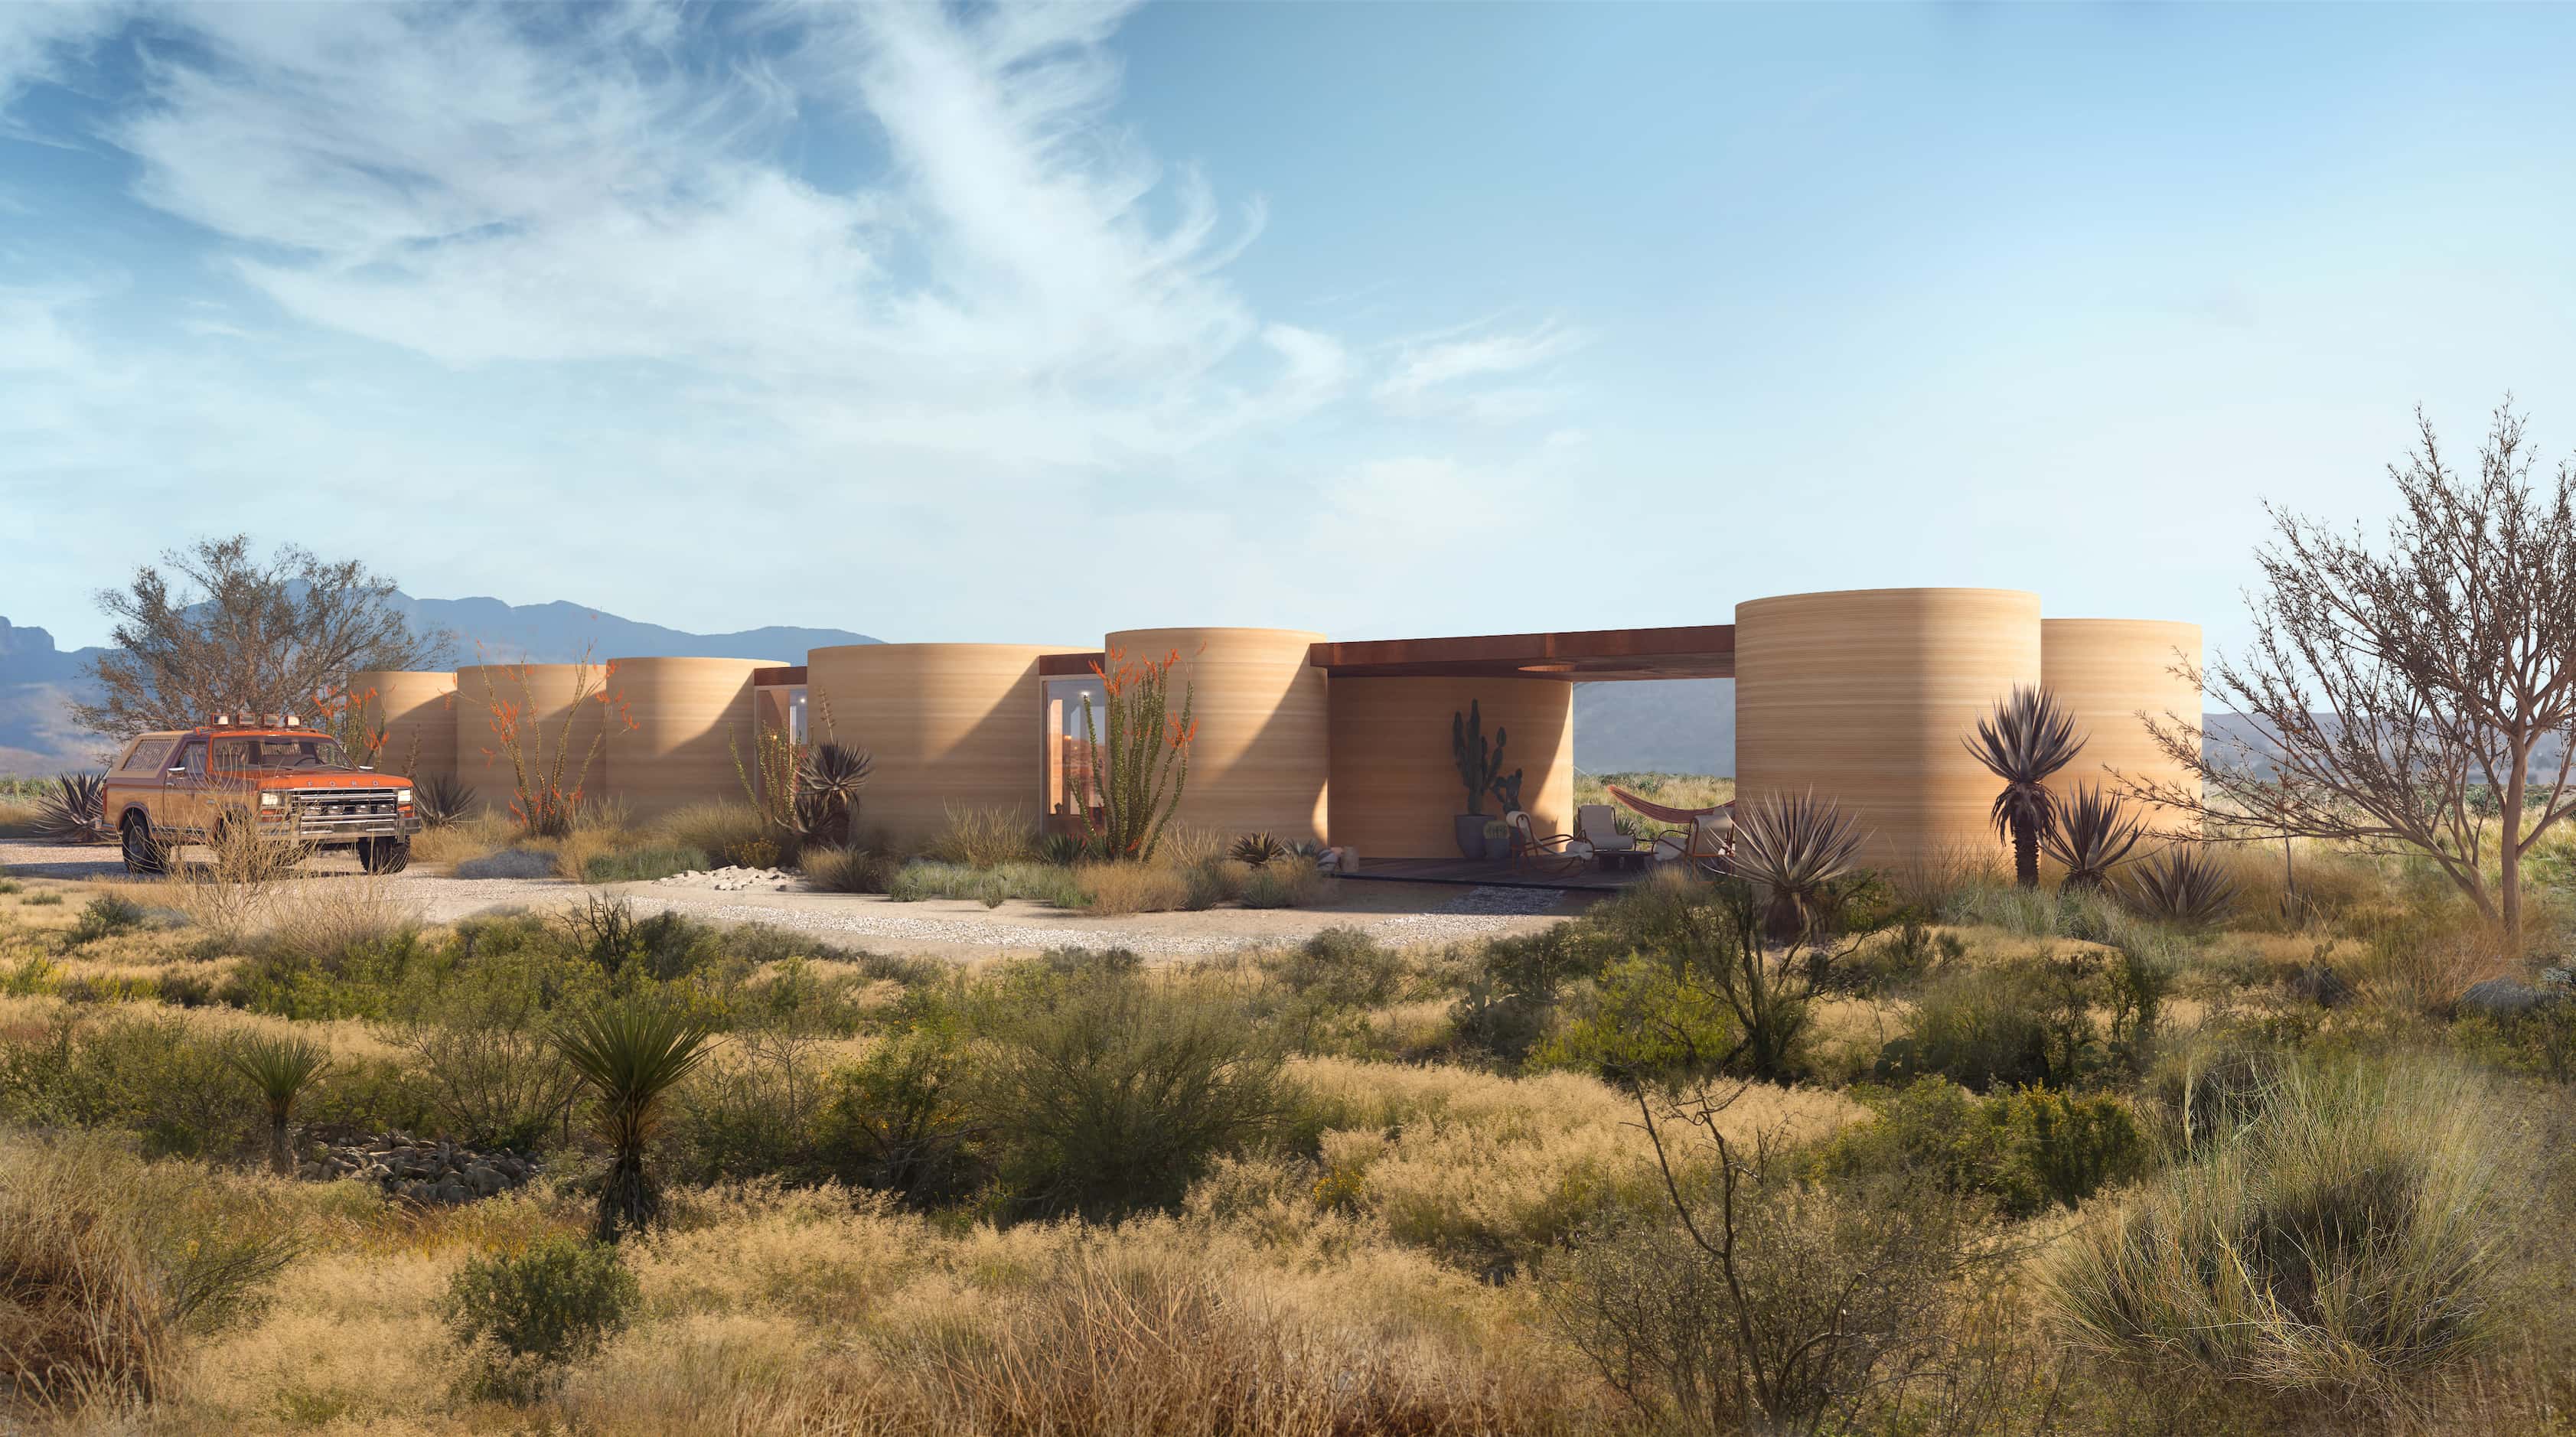 Bjarke Ingels Group is the design architect behind the single-family homes that will join...